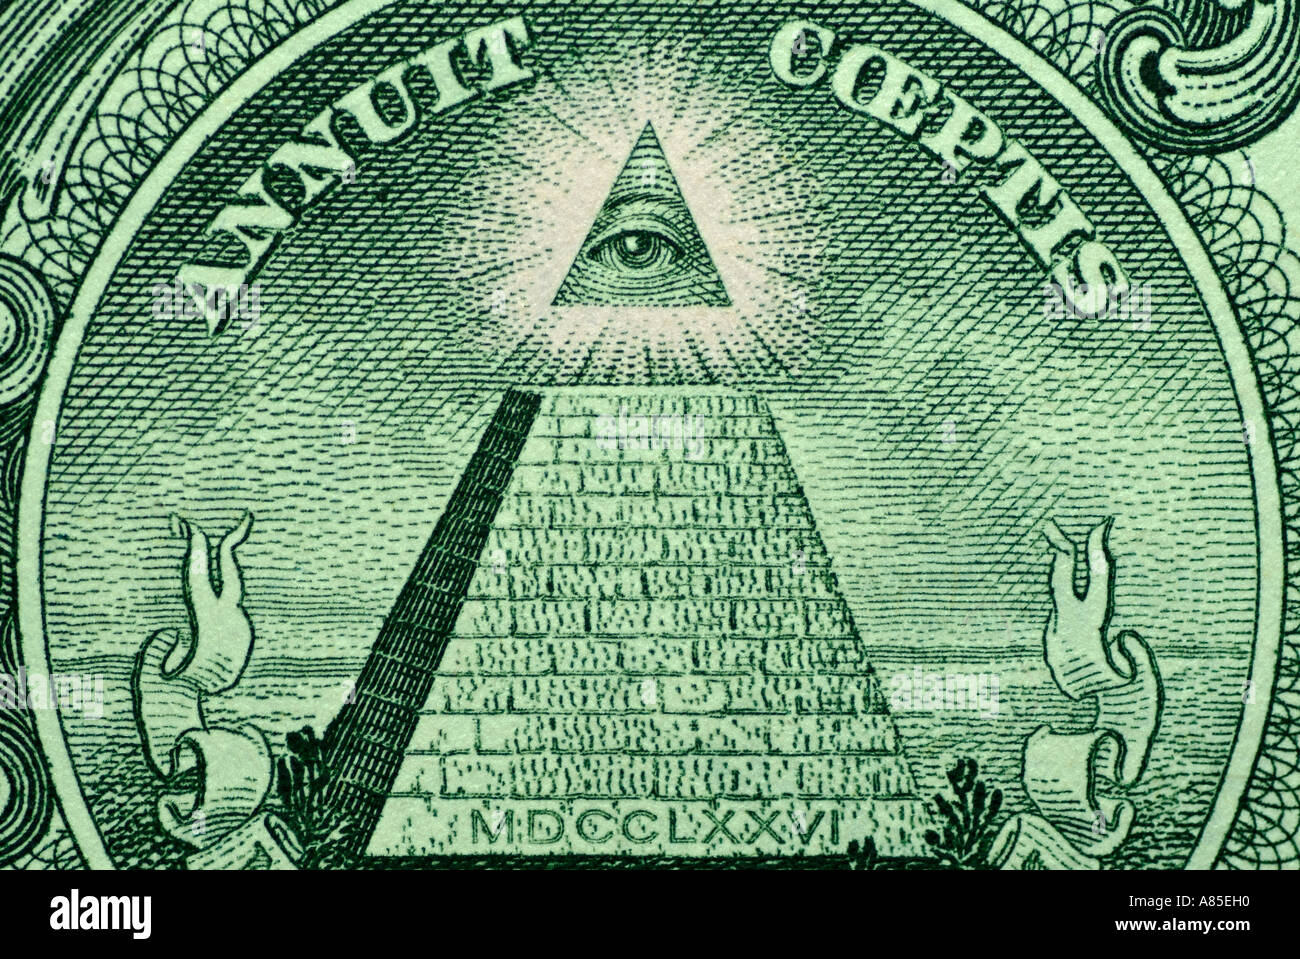 american-us-one-dollar-note-showing-a-pyramid-with-13-steps-and-an-A85EH0.jpg